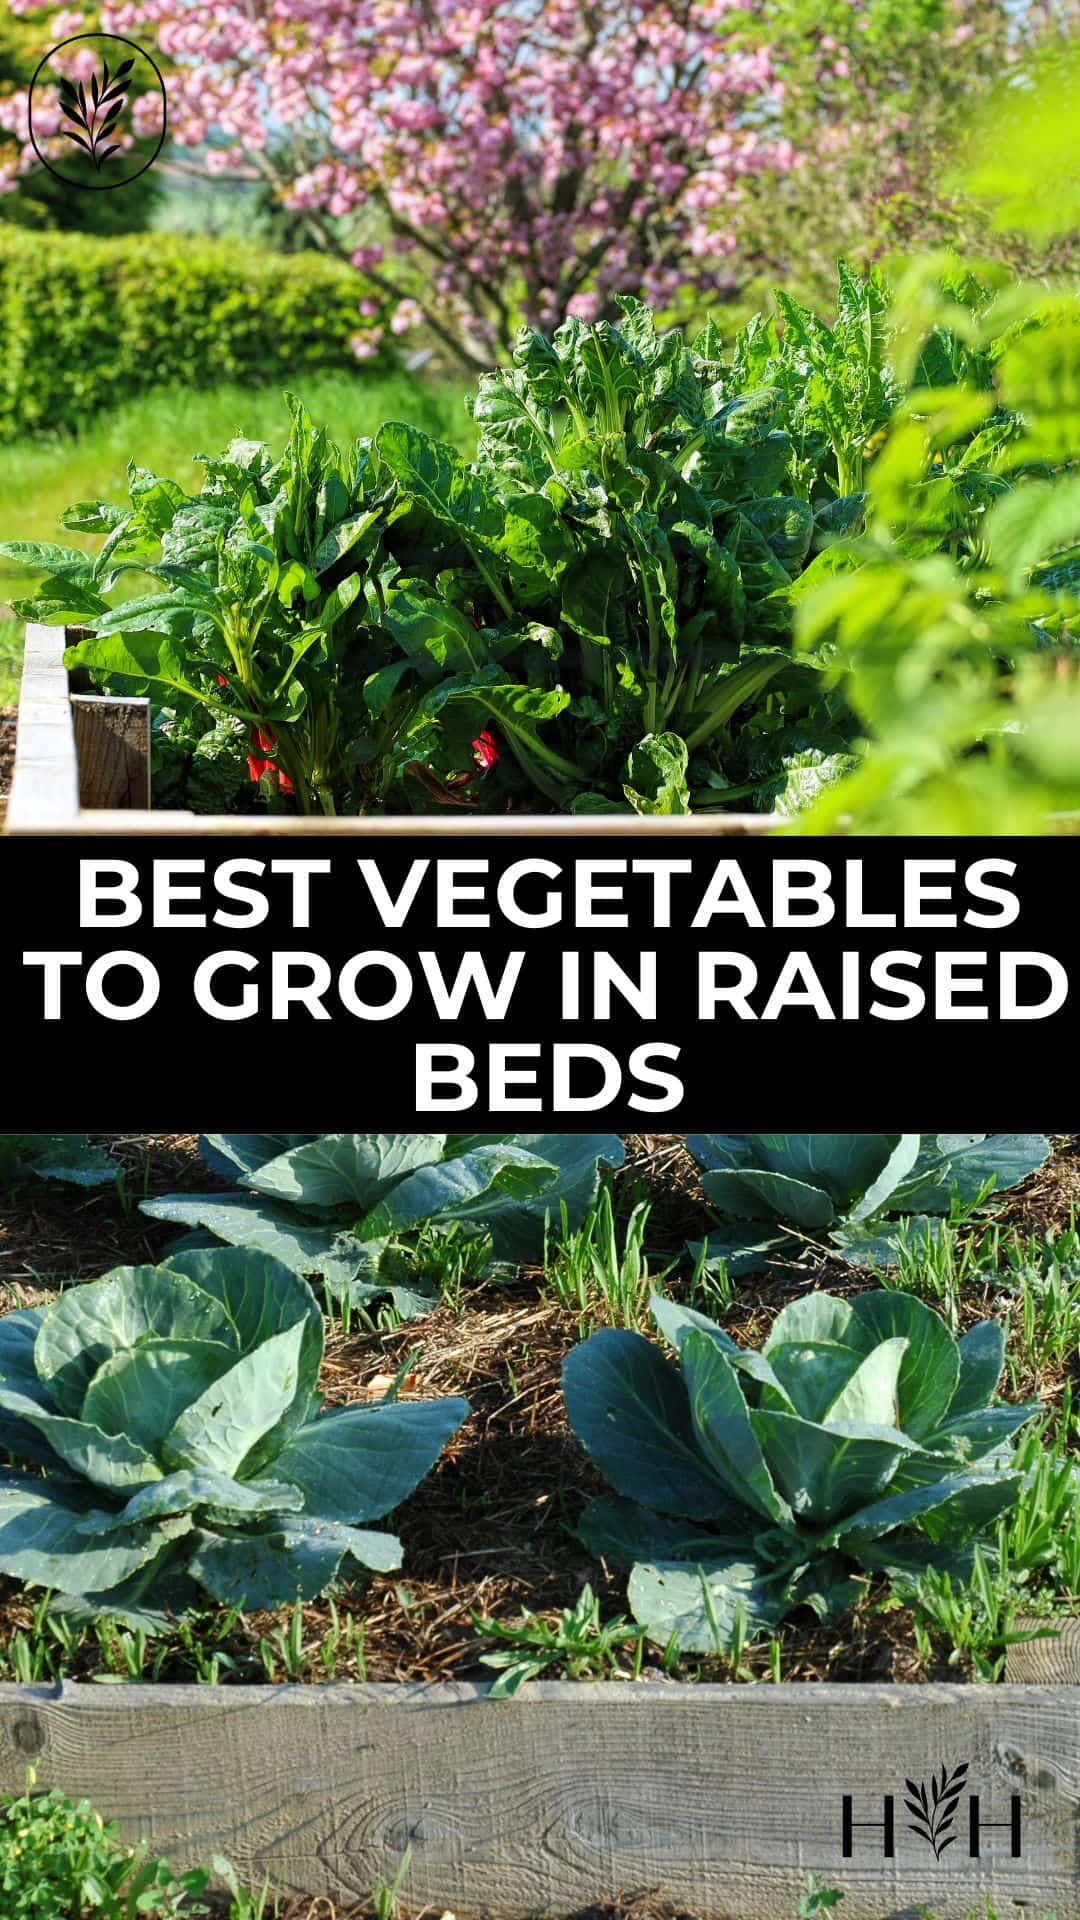 Best vegetables to grow in raised beds via @home4theharvest